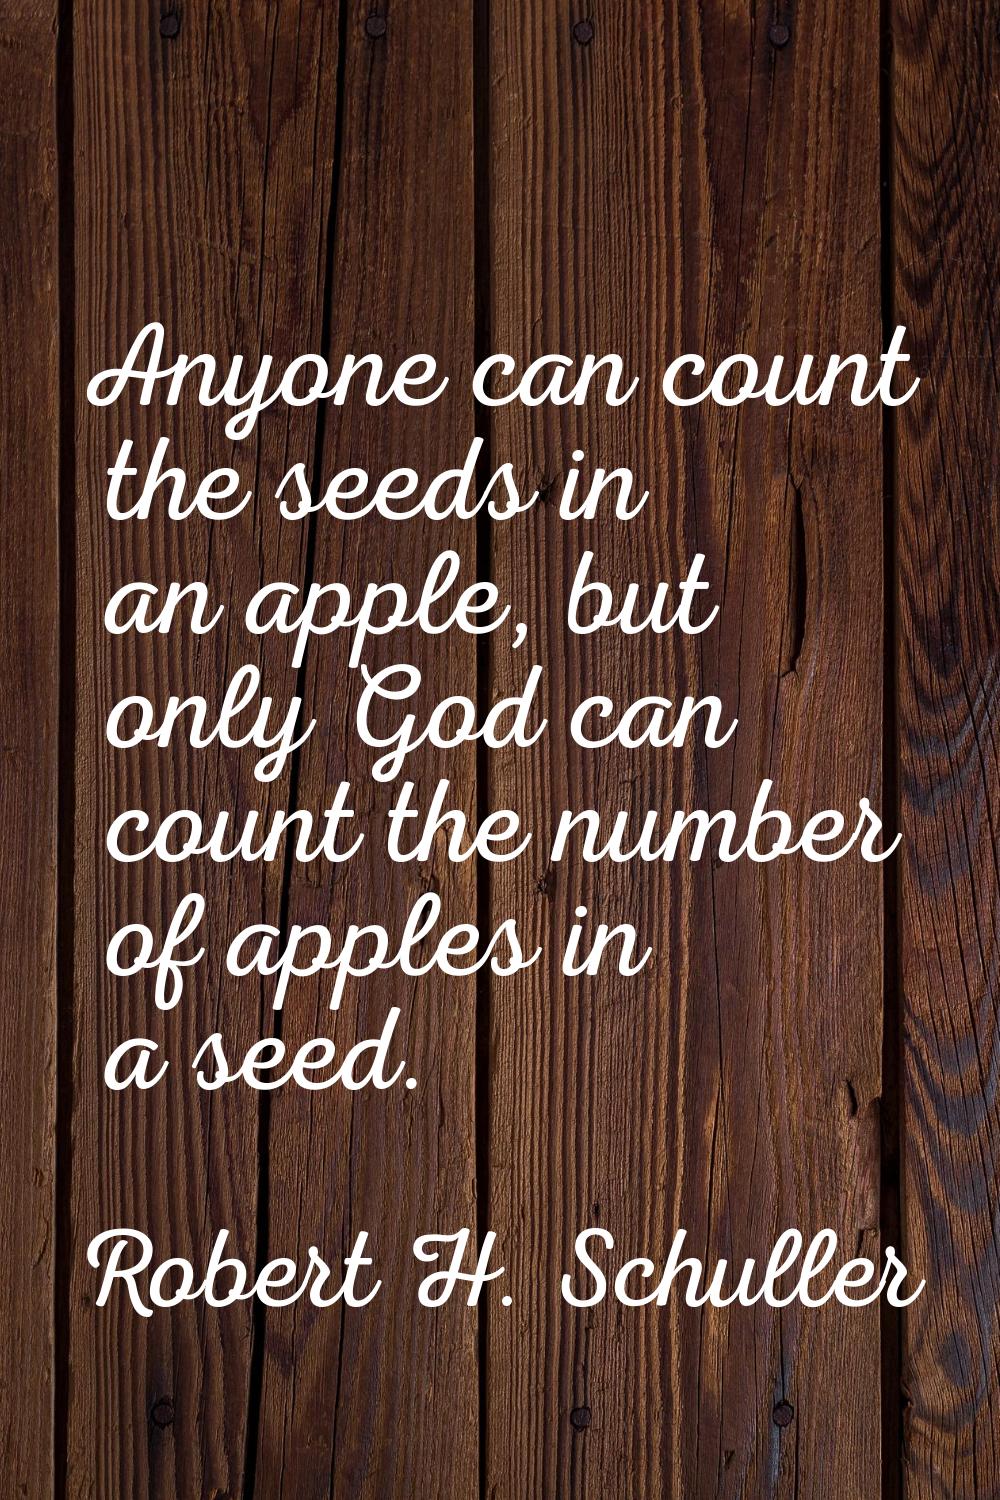 Anyone can count the seeds in an apple, but only God can count the number of apples in a seed.